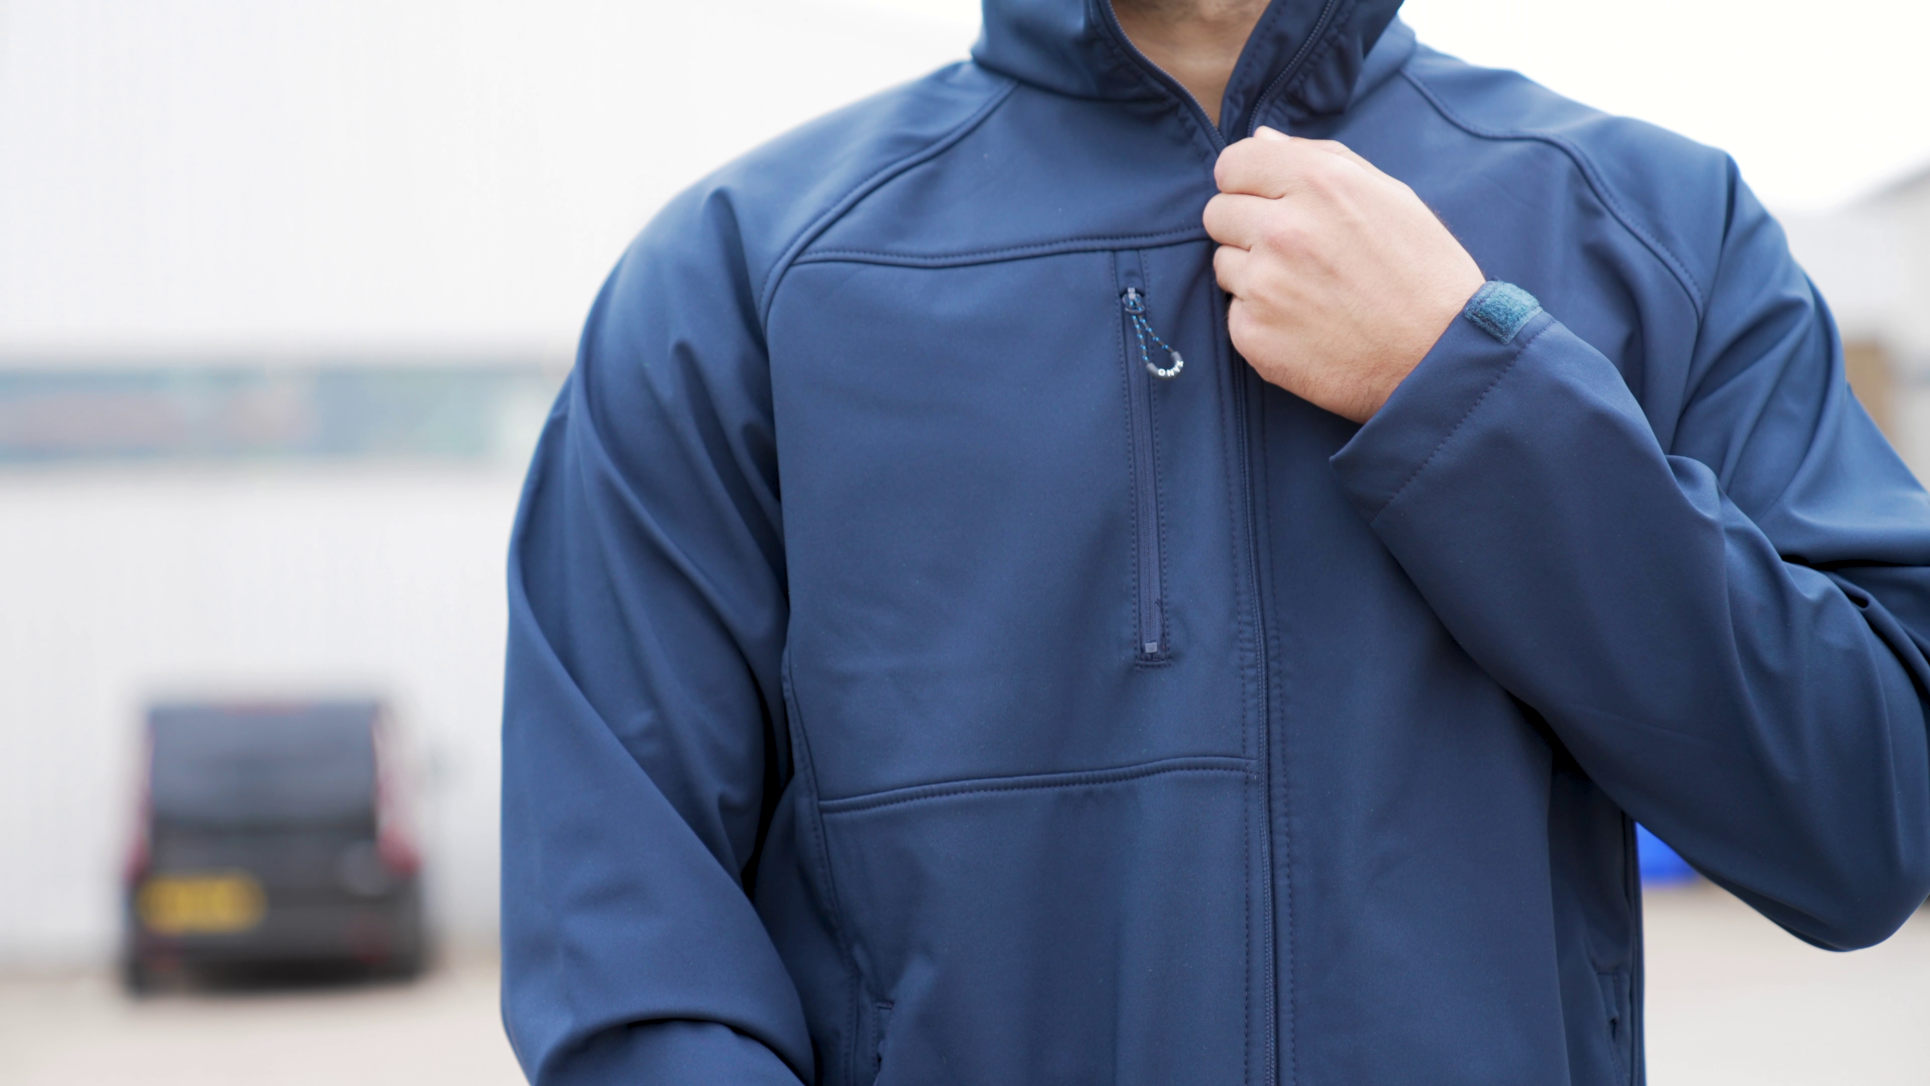 Layering up with an Onyx softshell jacket